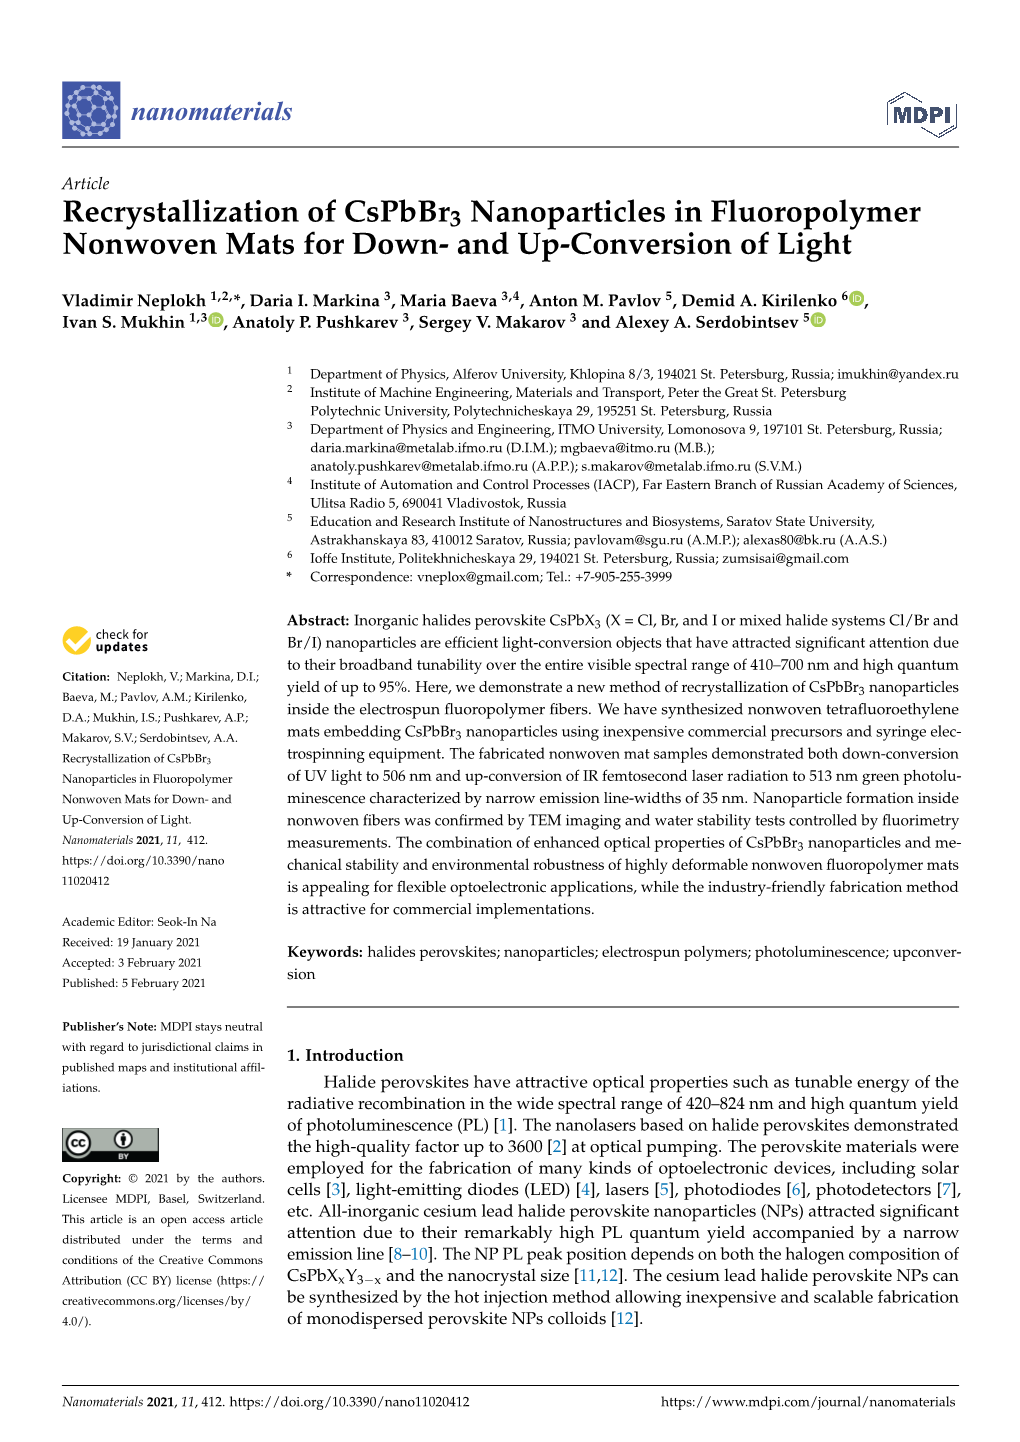 Recrystallization of Cspbbr3 Nanoparticles in Fluoropolymer Nonwoven Mats for Down- and Up-Conversion of Light